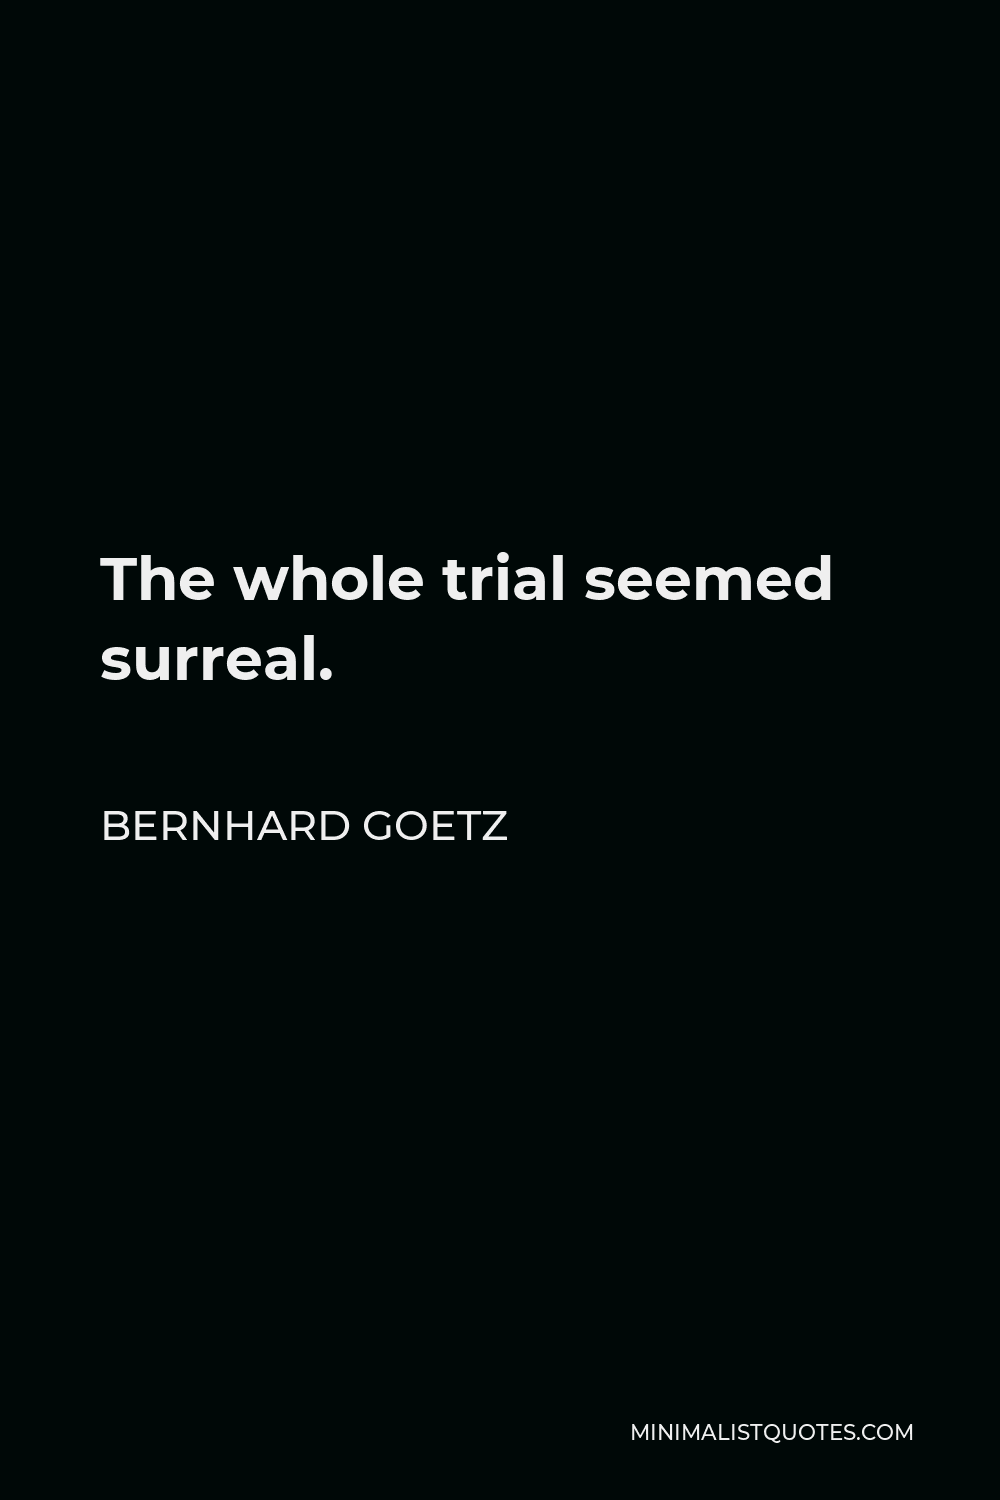 Bernhard Goetz Quote - The whole trial seemed surreal.